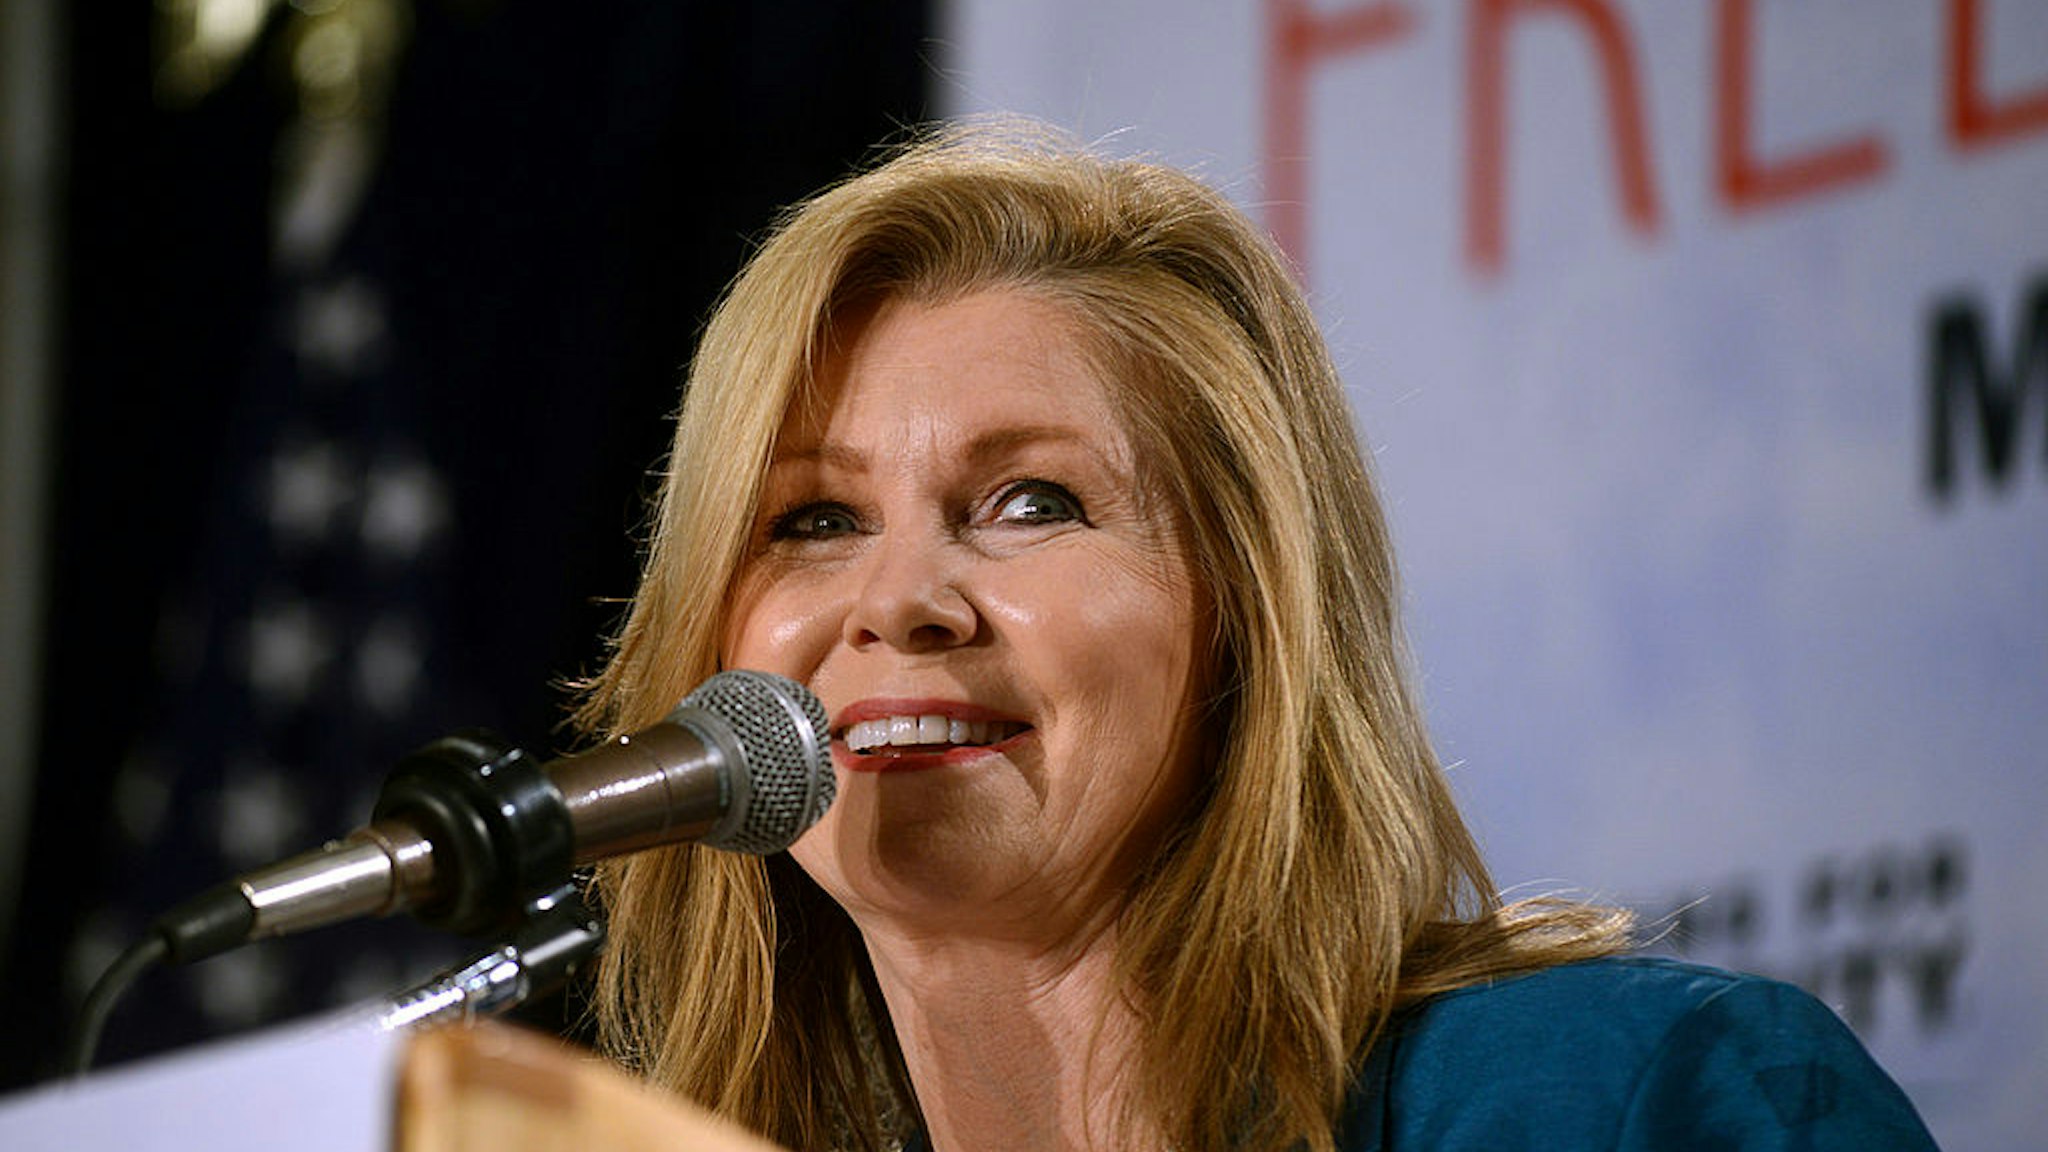 U.S. Representative Marsha Blackburn (R-TN) speaks at the Freedom Summit at The Executive Court Banquet Facility April 12, 2014 in Manchester, New Hampshire.